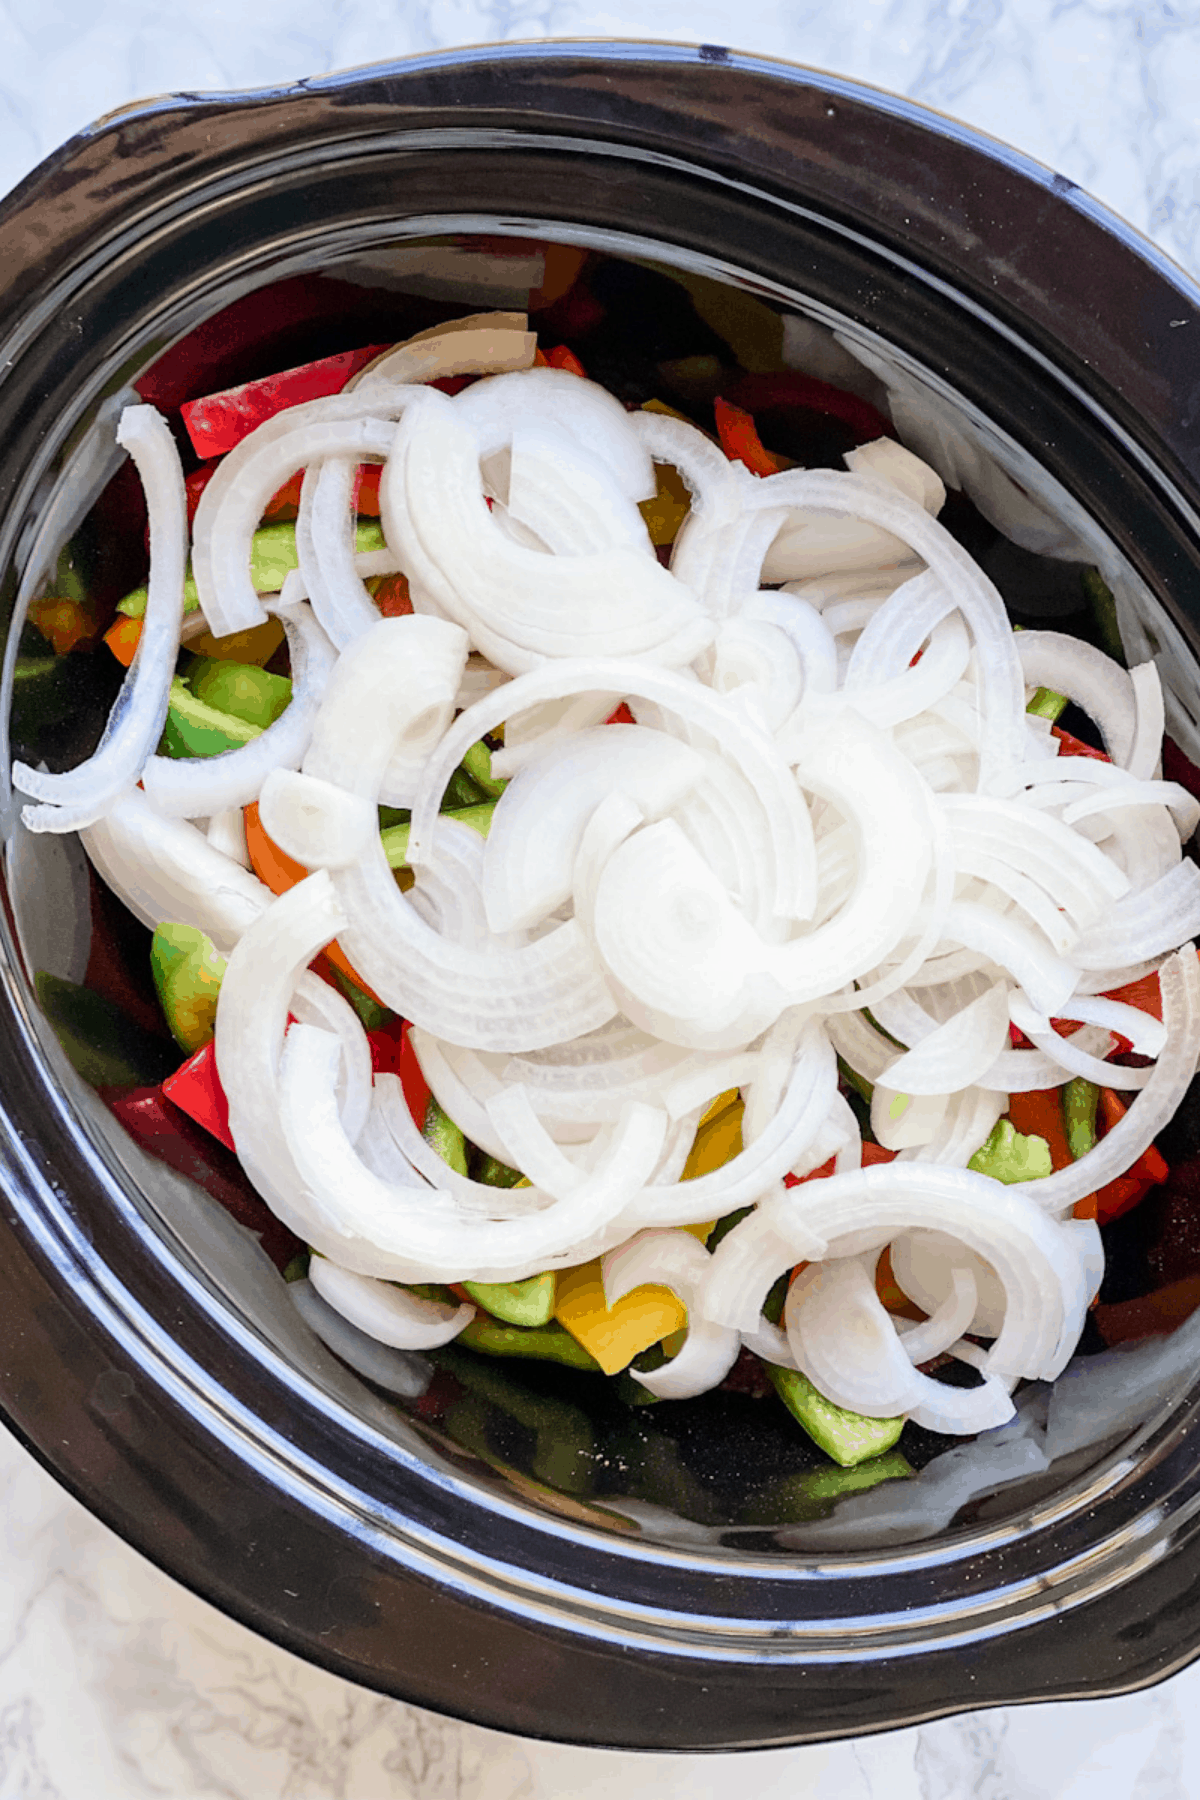 Crockpot insert filled with steak, peppers, and onions for fajitas.